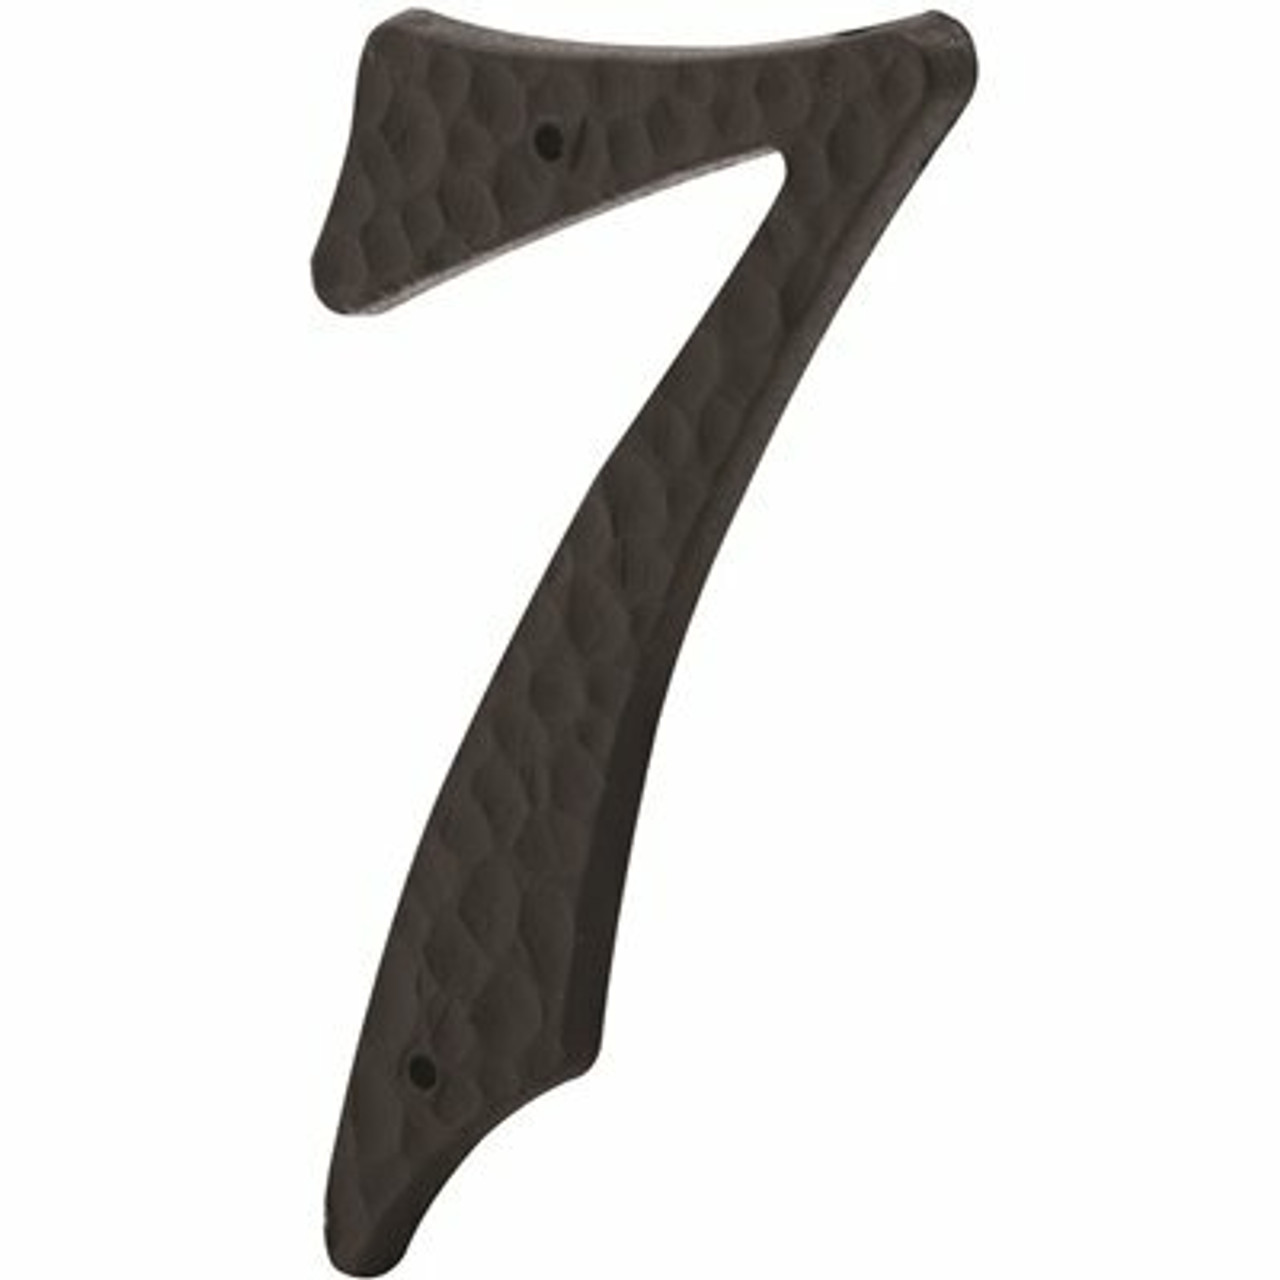 Prime-Line House Number 7 With Nails, Black Plastic, 3 In., 2 Per Pack